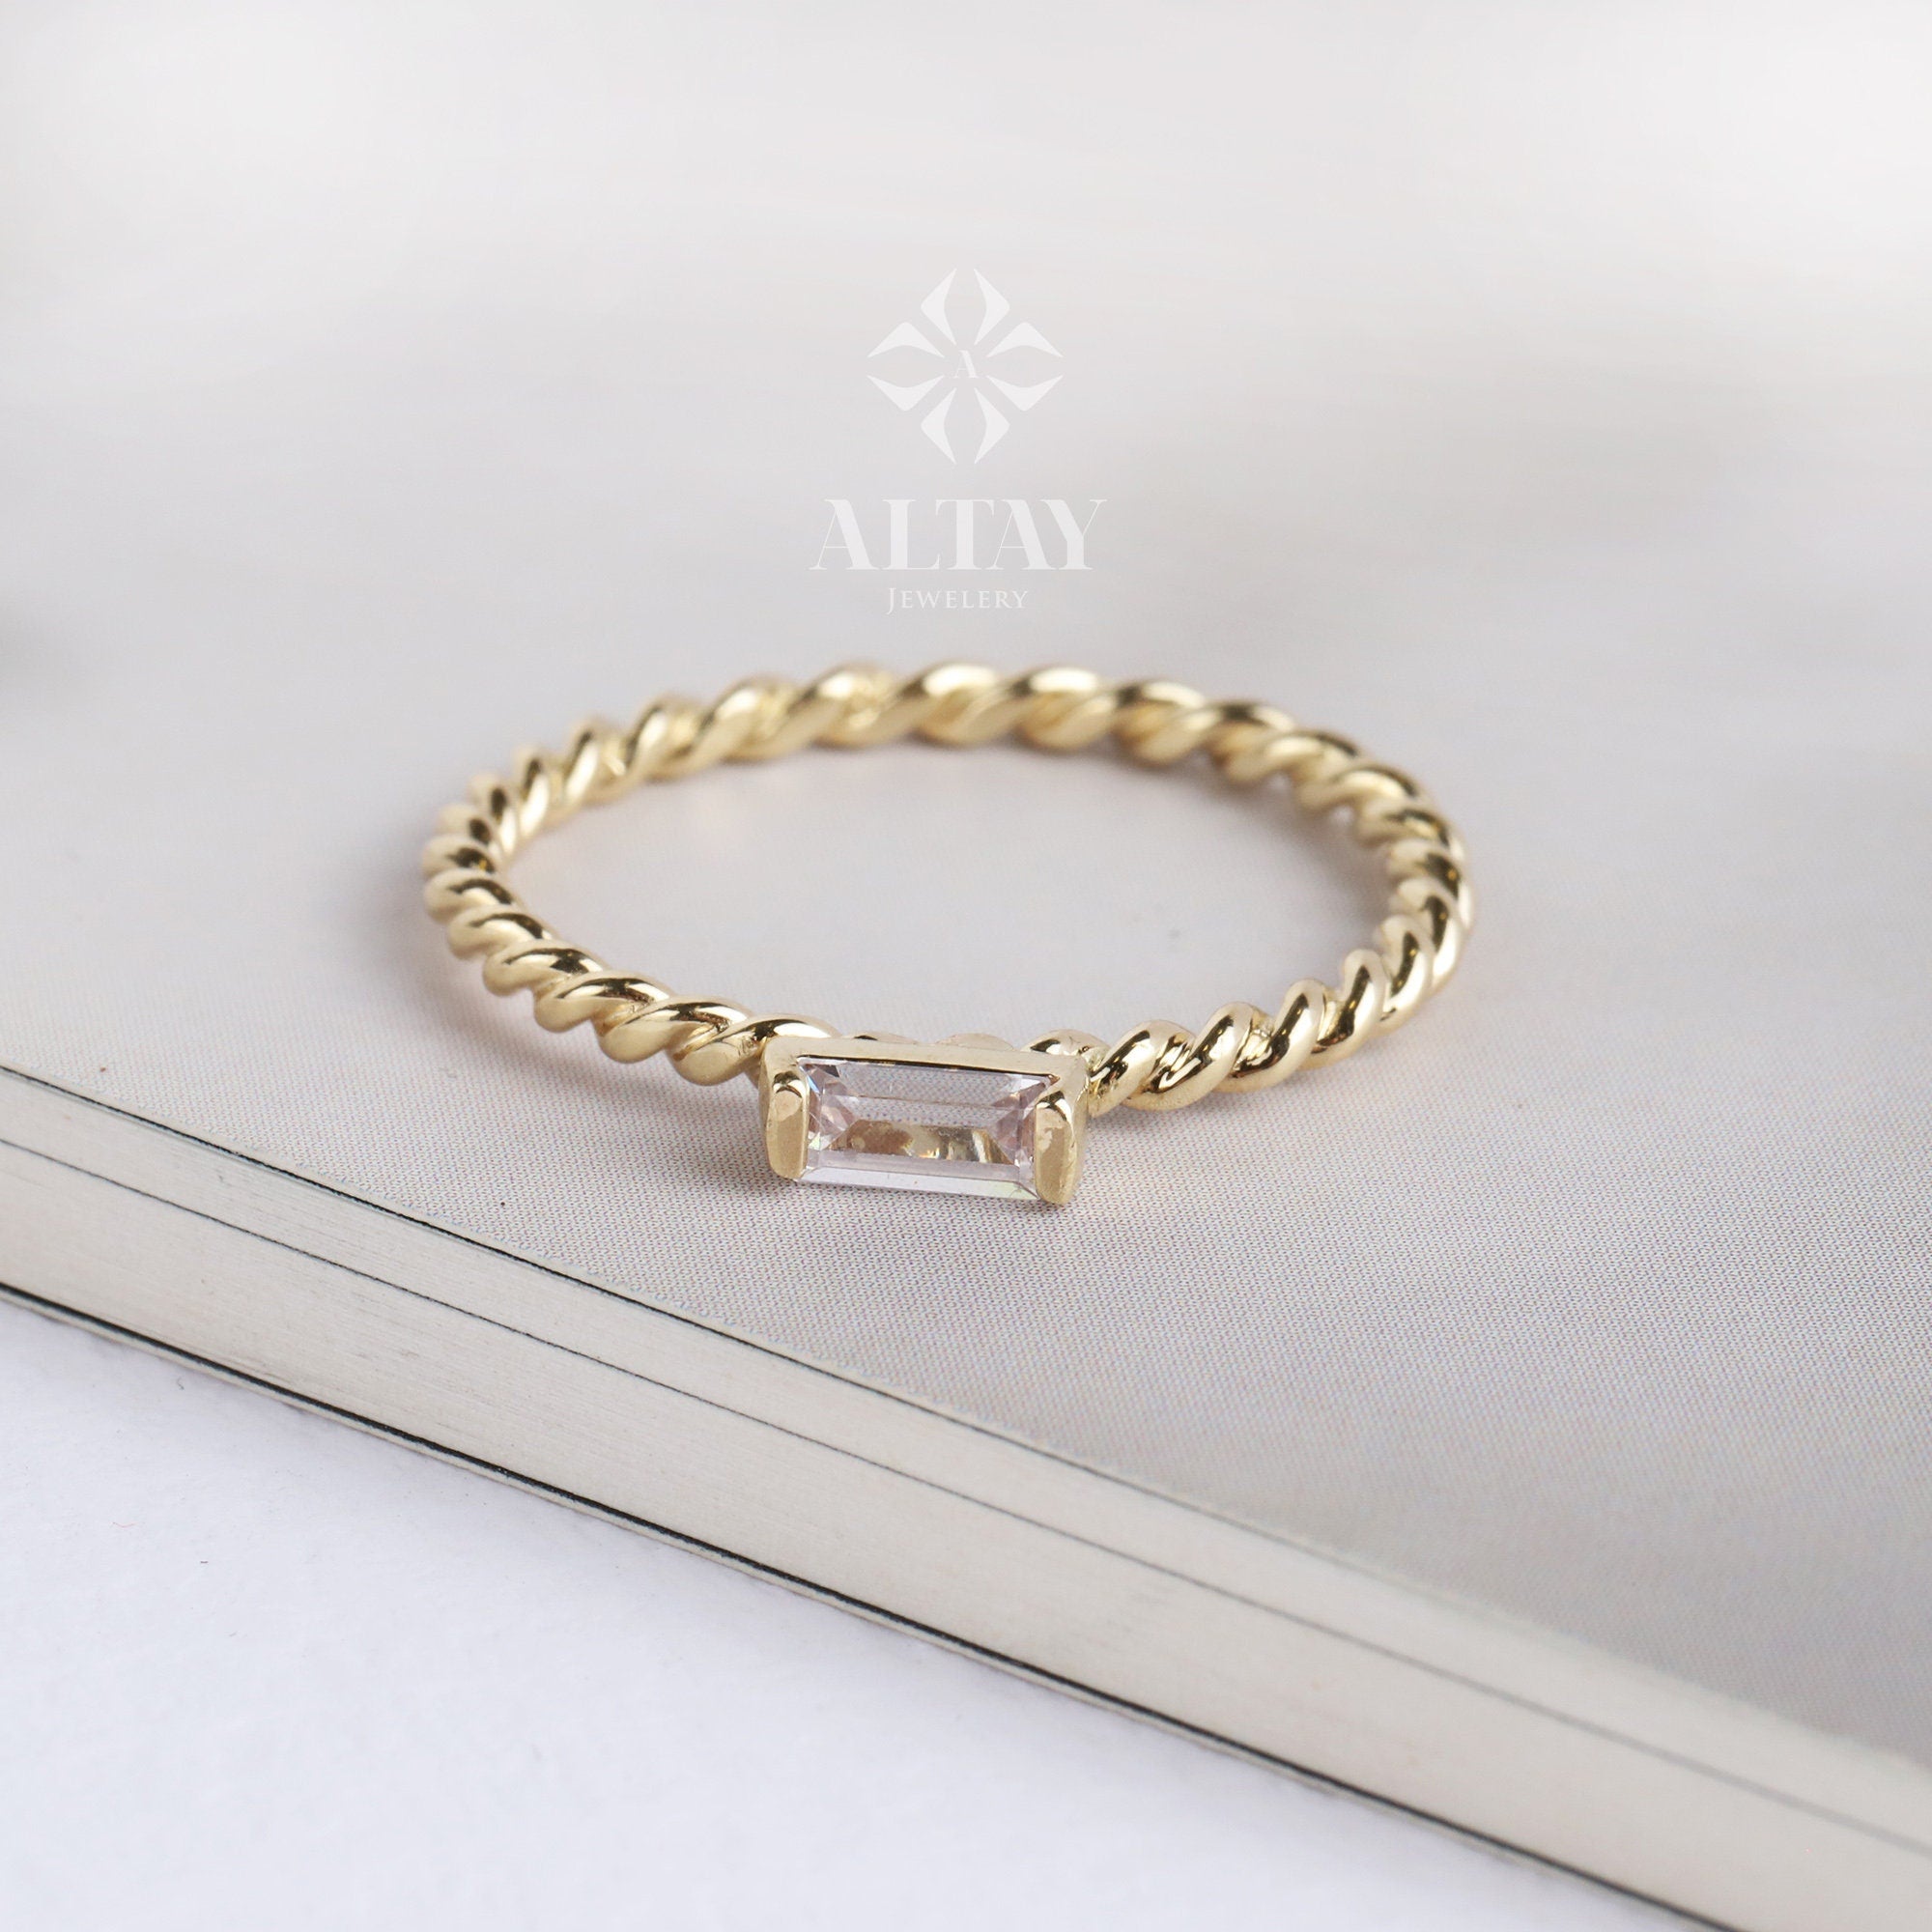 14K Gold Baguette Birthstone Ring, Custom Stackable Gemstone Ring, Braided Twist Rope Band Ring, Family Birthstone Ring, Personalized Gift